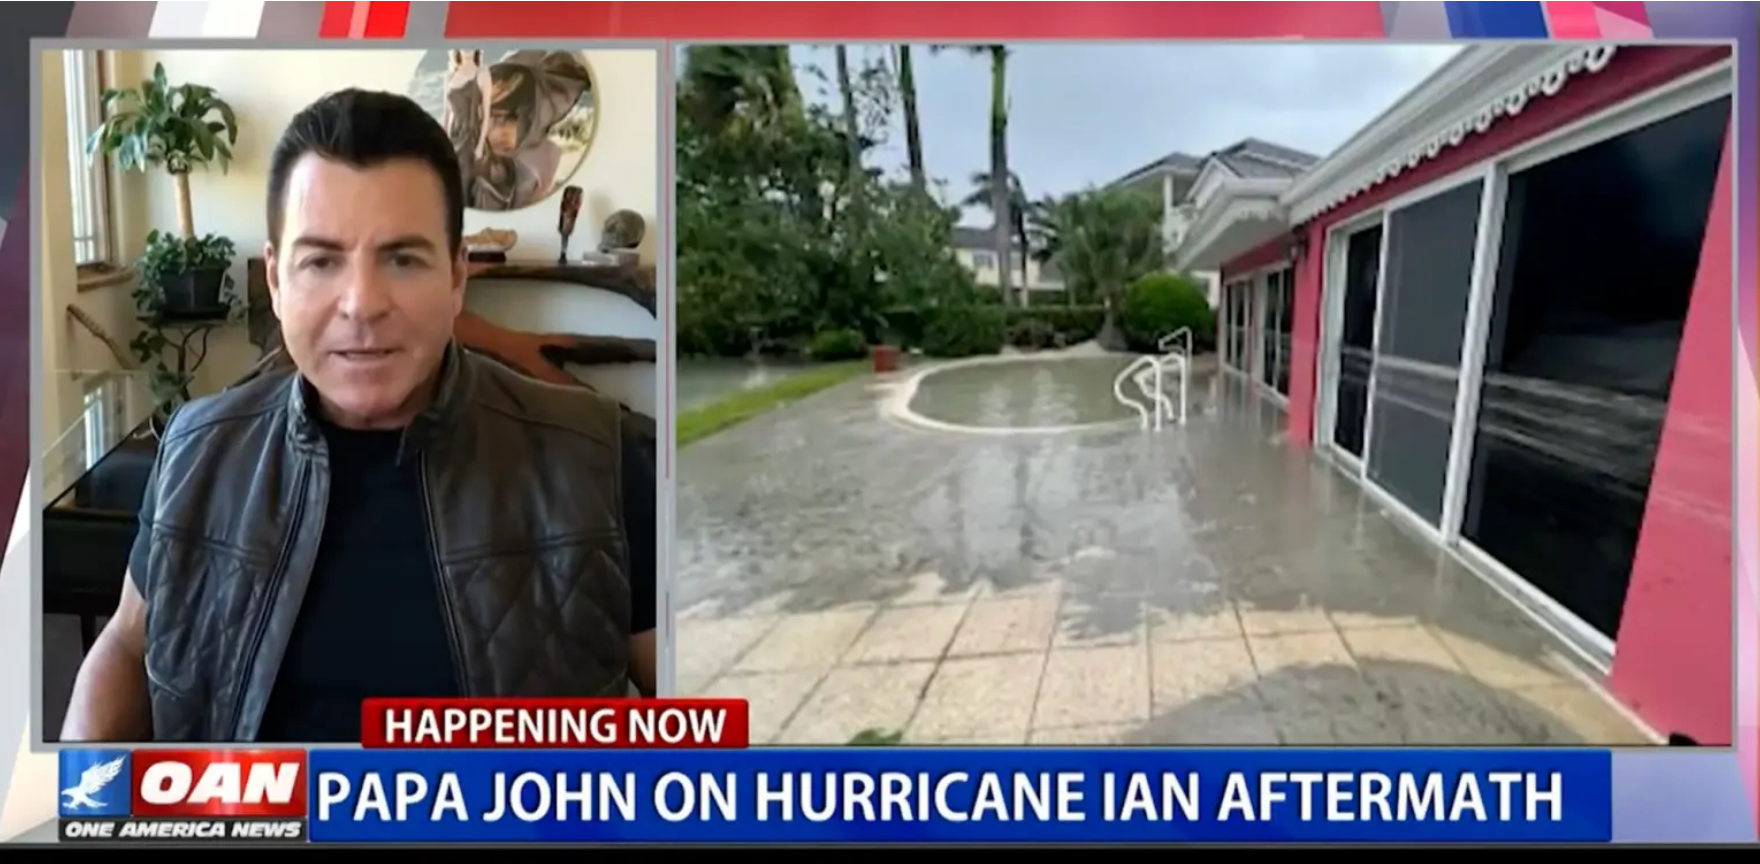 John Schnatter said he had ‘lost a home’ in Hurricane Ian, prompting widespread ridicule